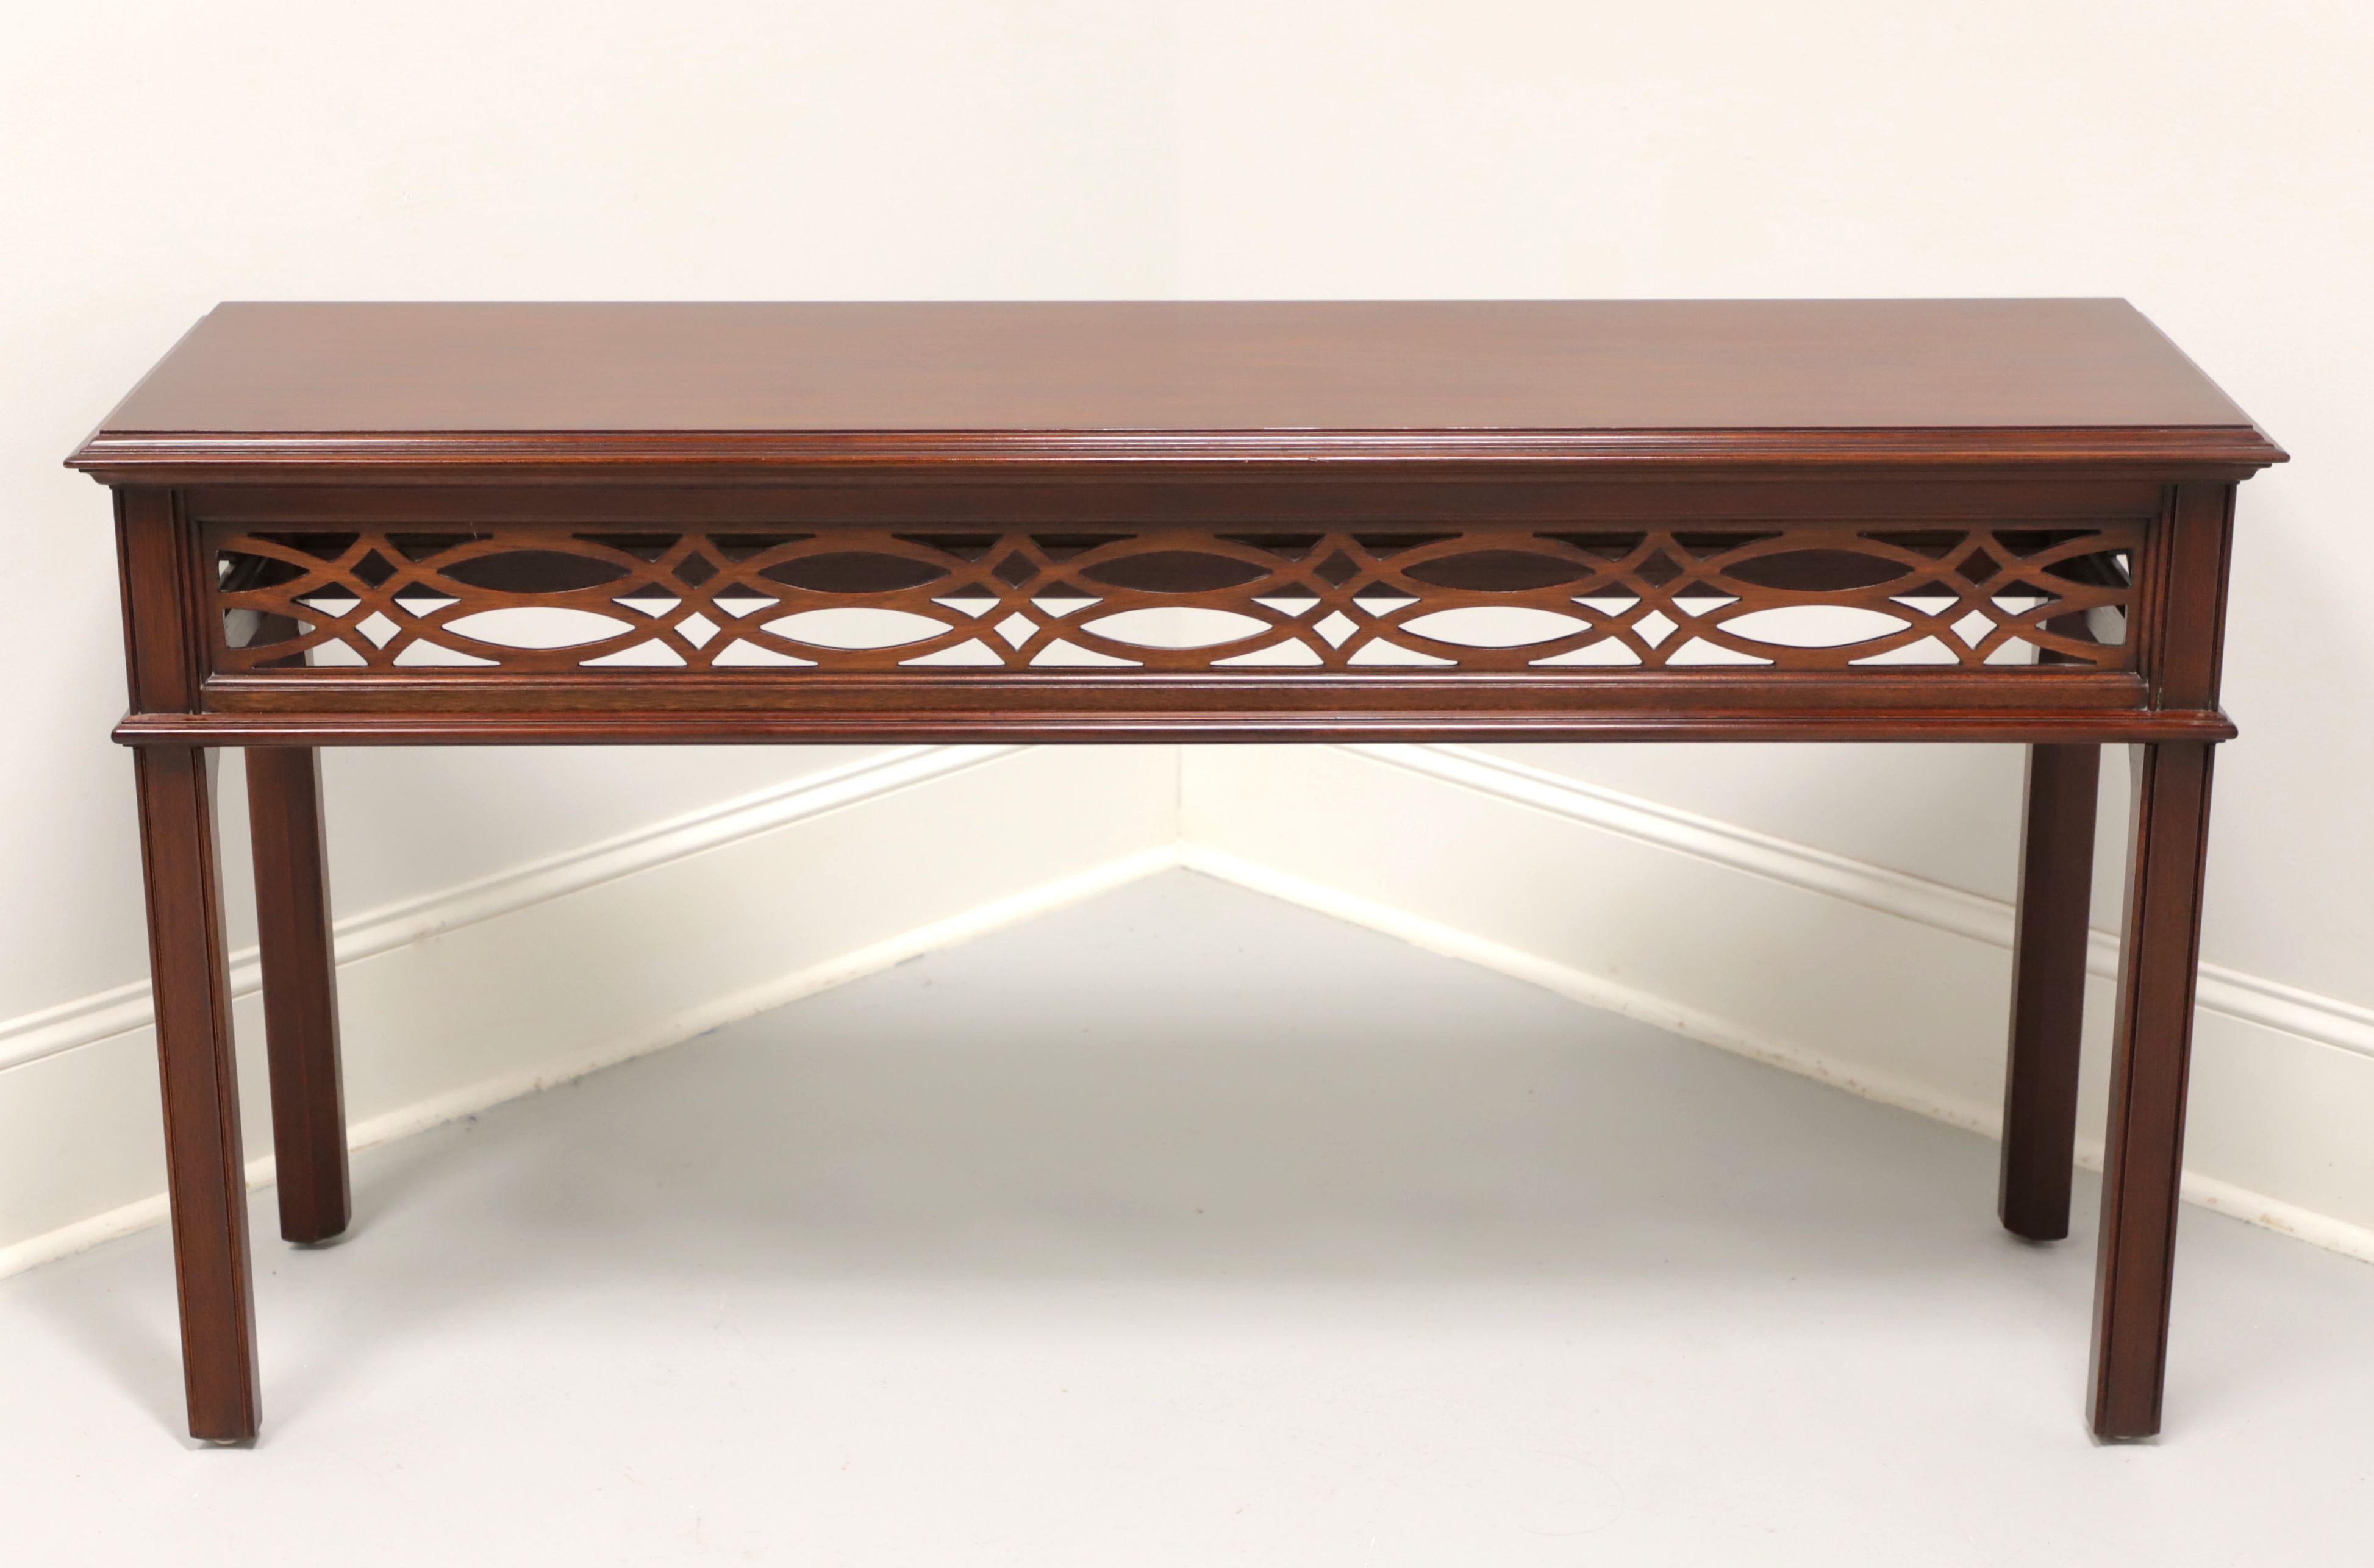 A Chinese Chippendale style sofa table by Henkel Harris. Solid mahogany with bevel edge top, open decorative fretwork to apron, and carved straight legs. Made in Winchester, Virginia, USA, circa 1988.

Style #: 5710, Finish #: 29

Measures: